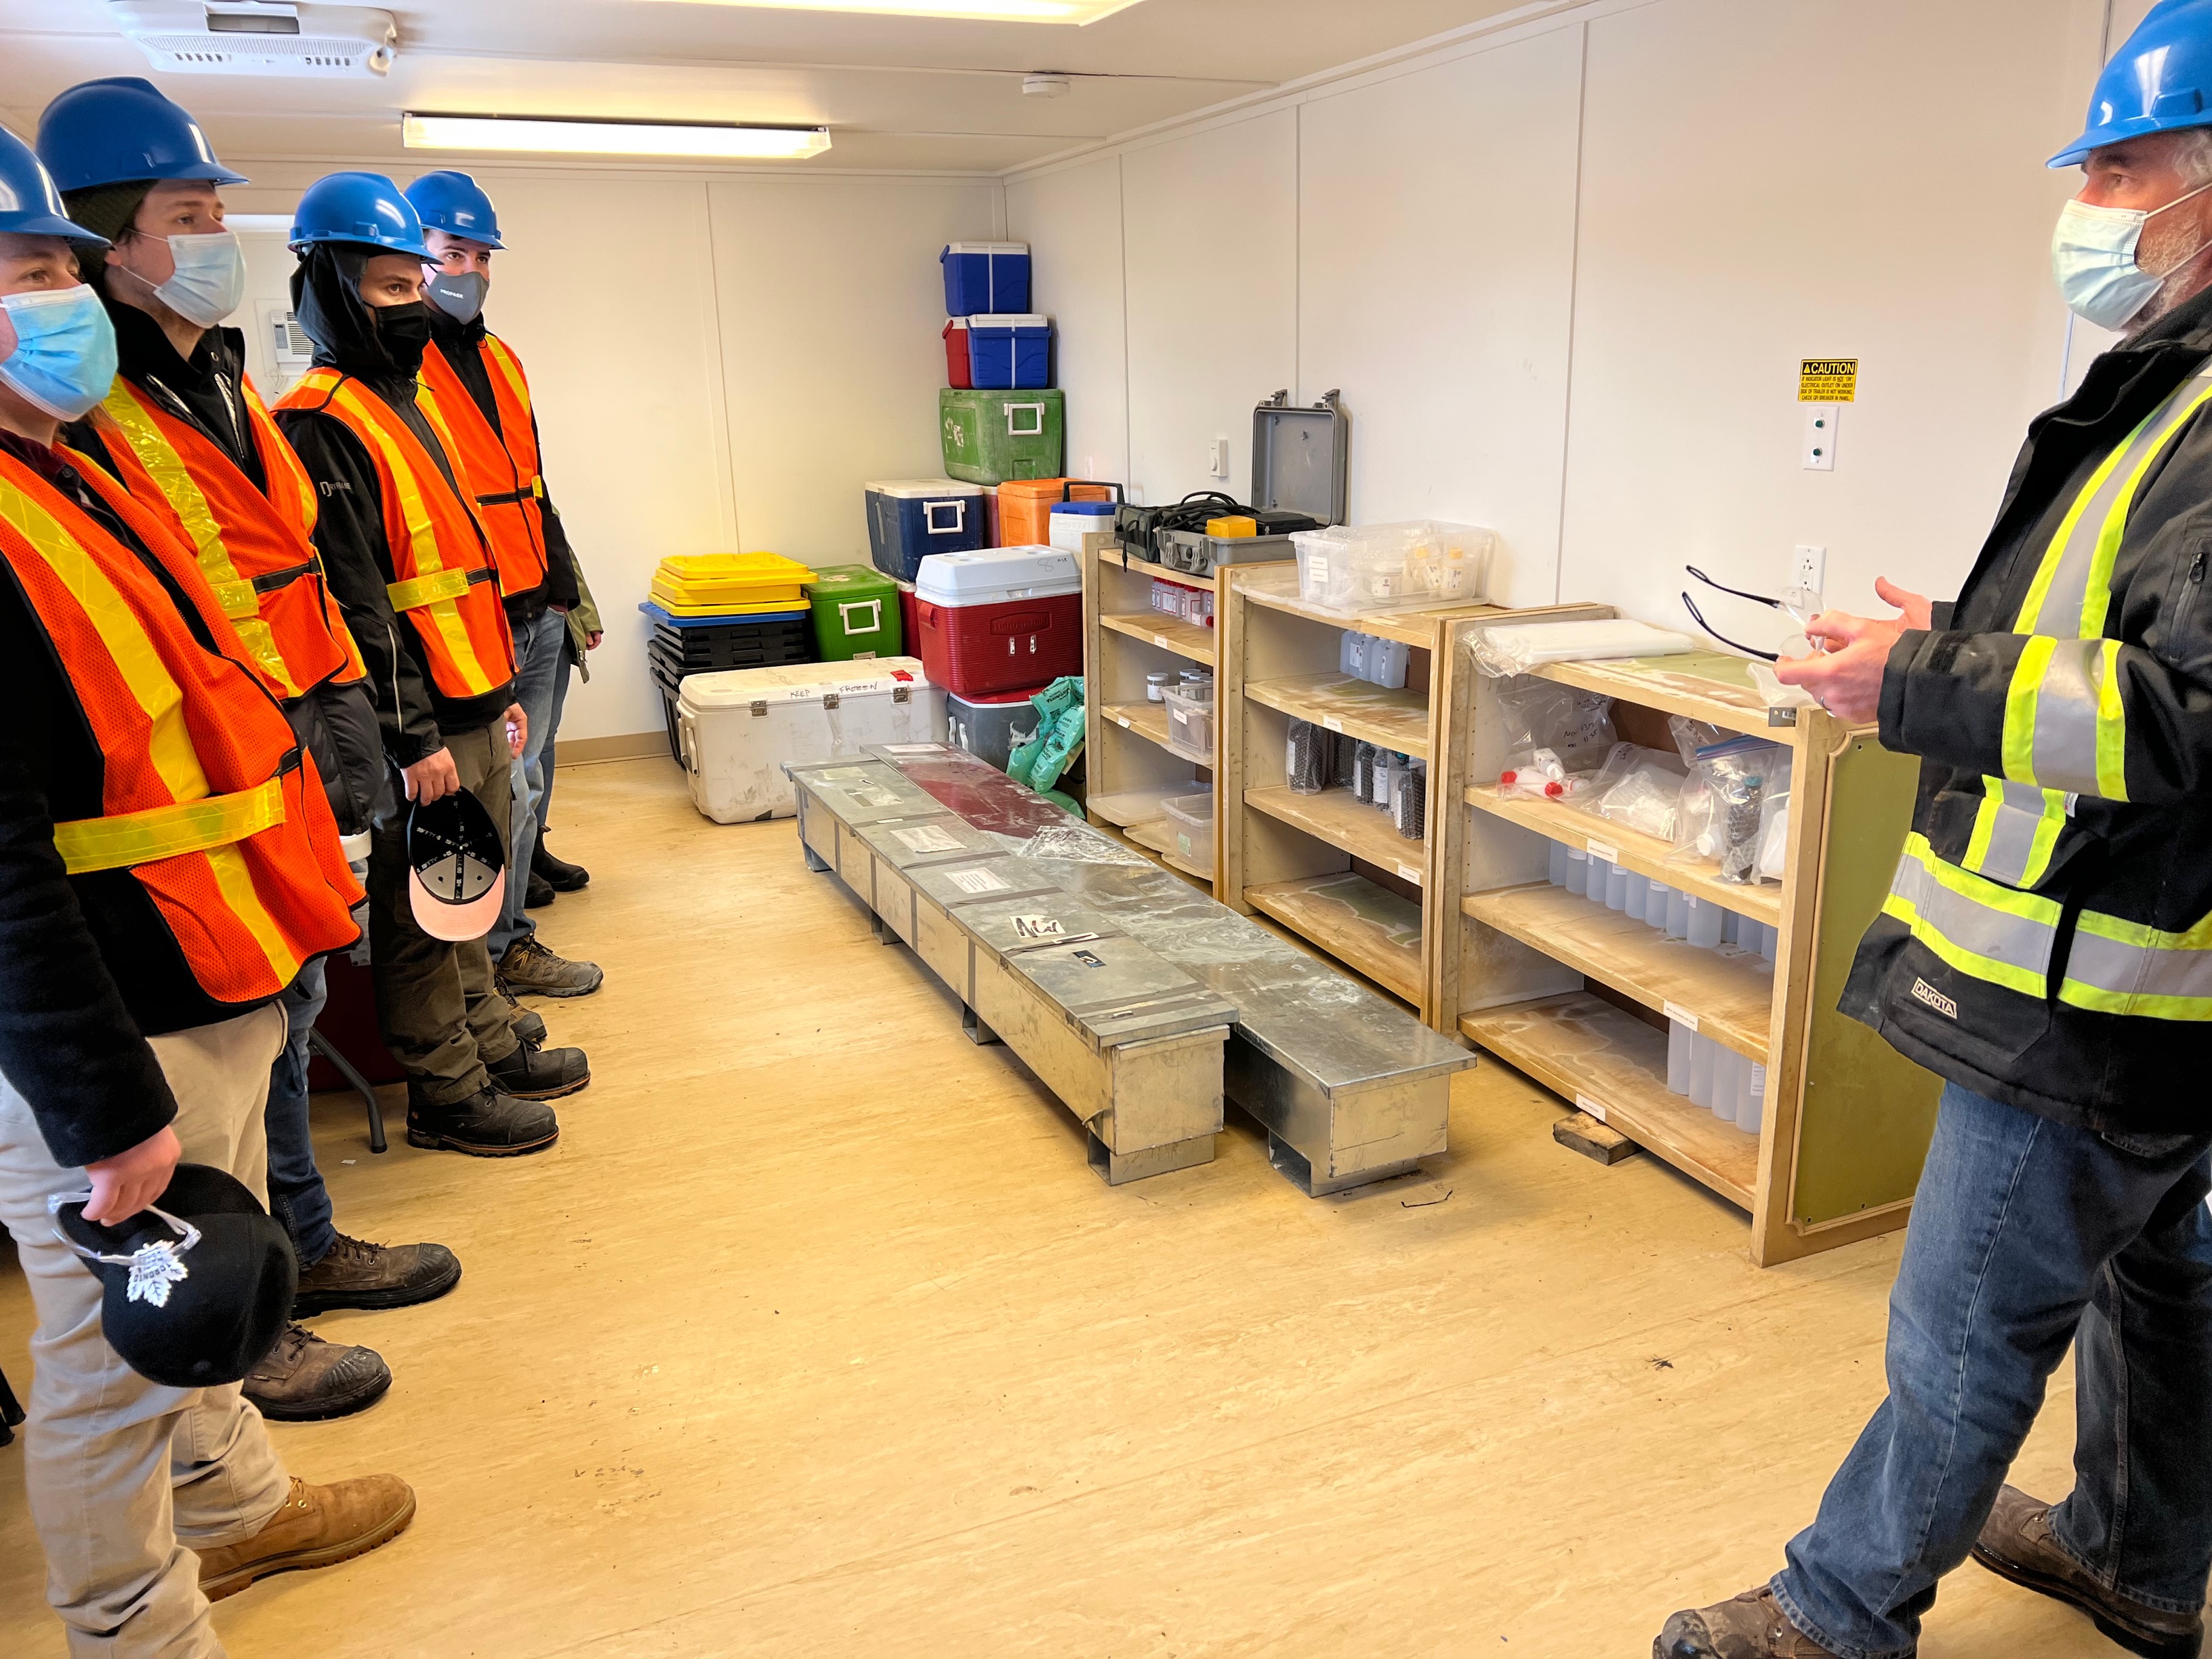 three people in safety vests and hard hats look at another person explaining what the rock samples are in front of them